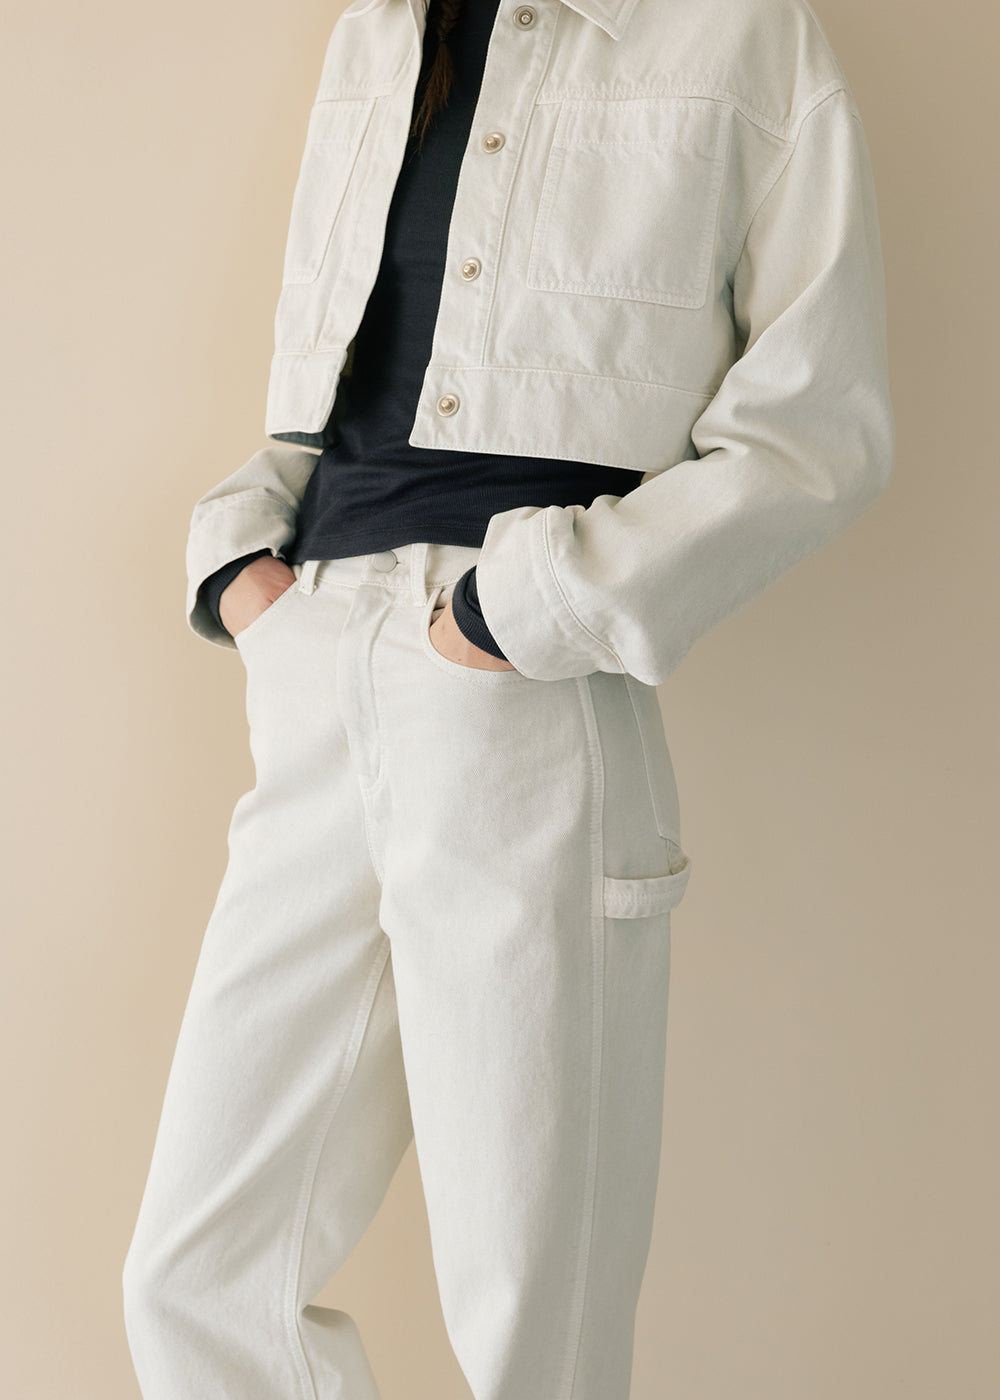 PIGMENT COTTON CROPPED JACKET_IVORY